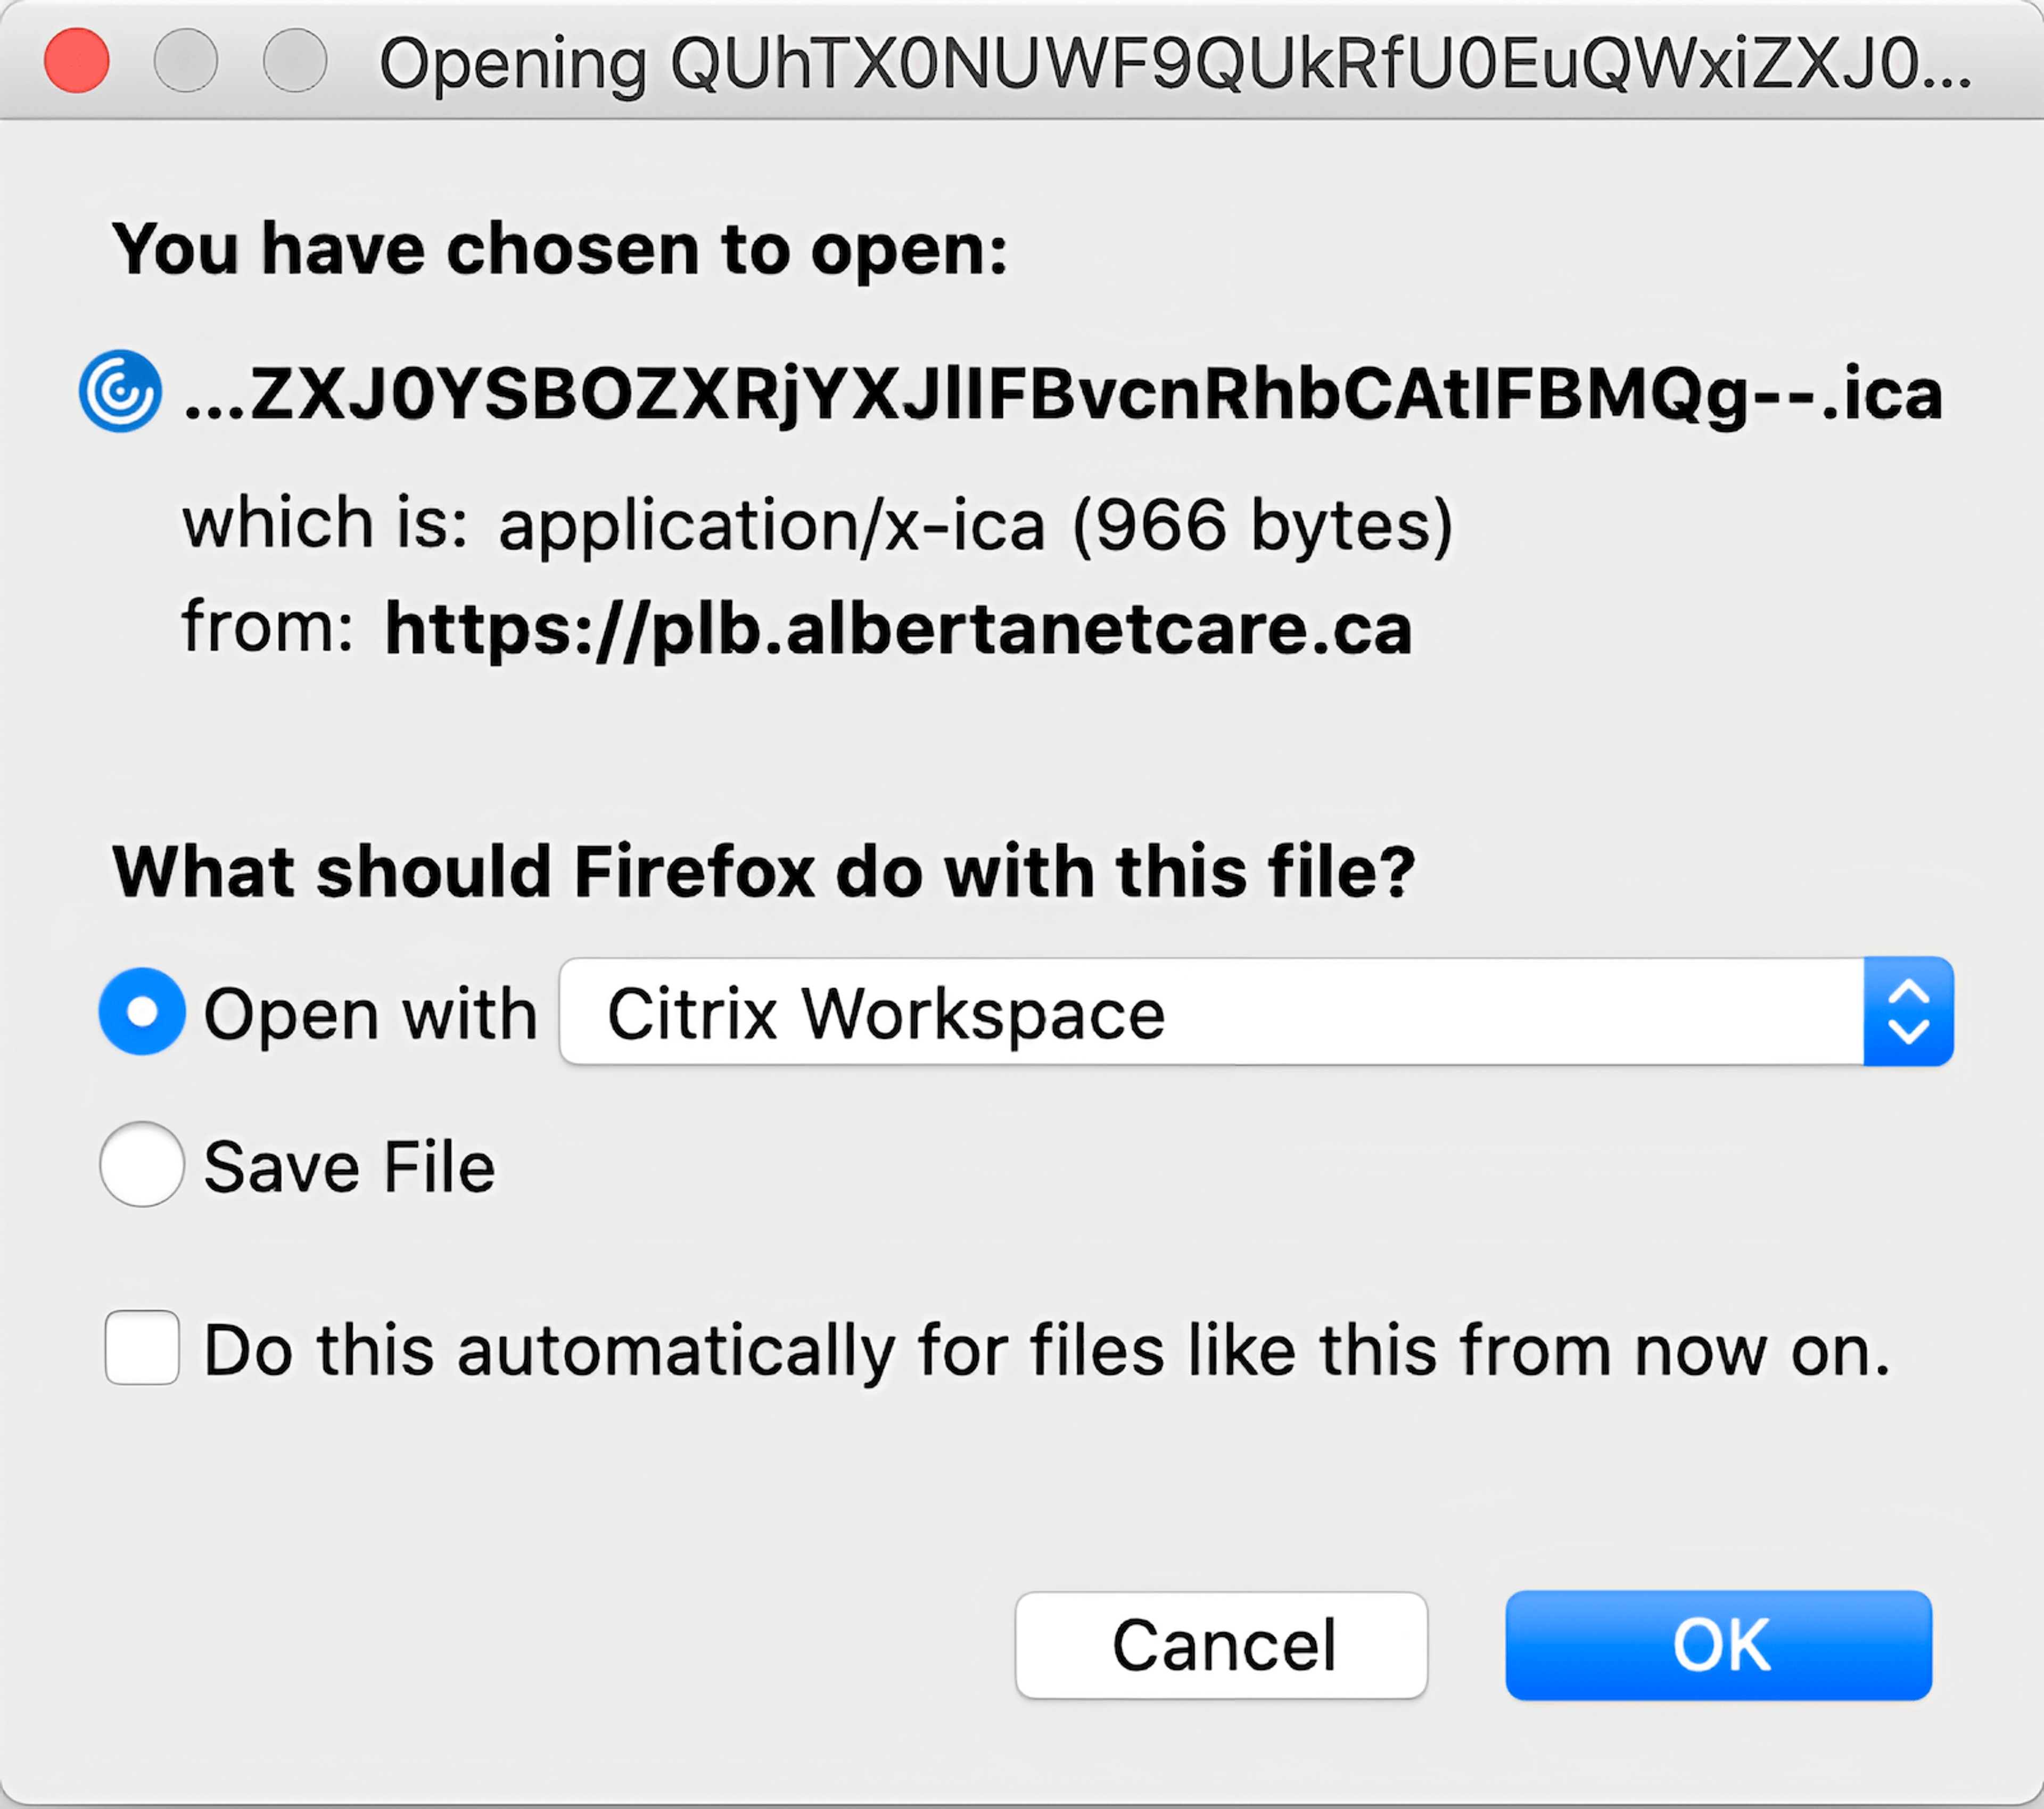 Firefox dialog checking if you'd like to open a file with Citrix Workspace